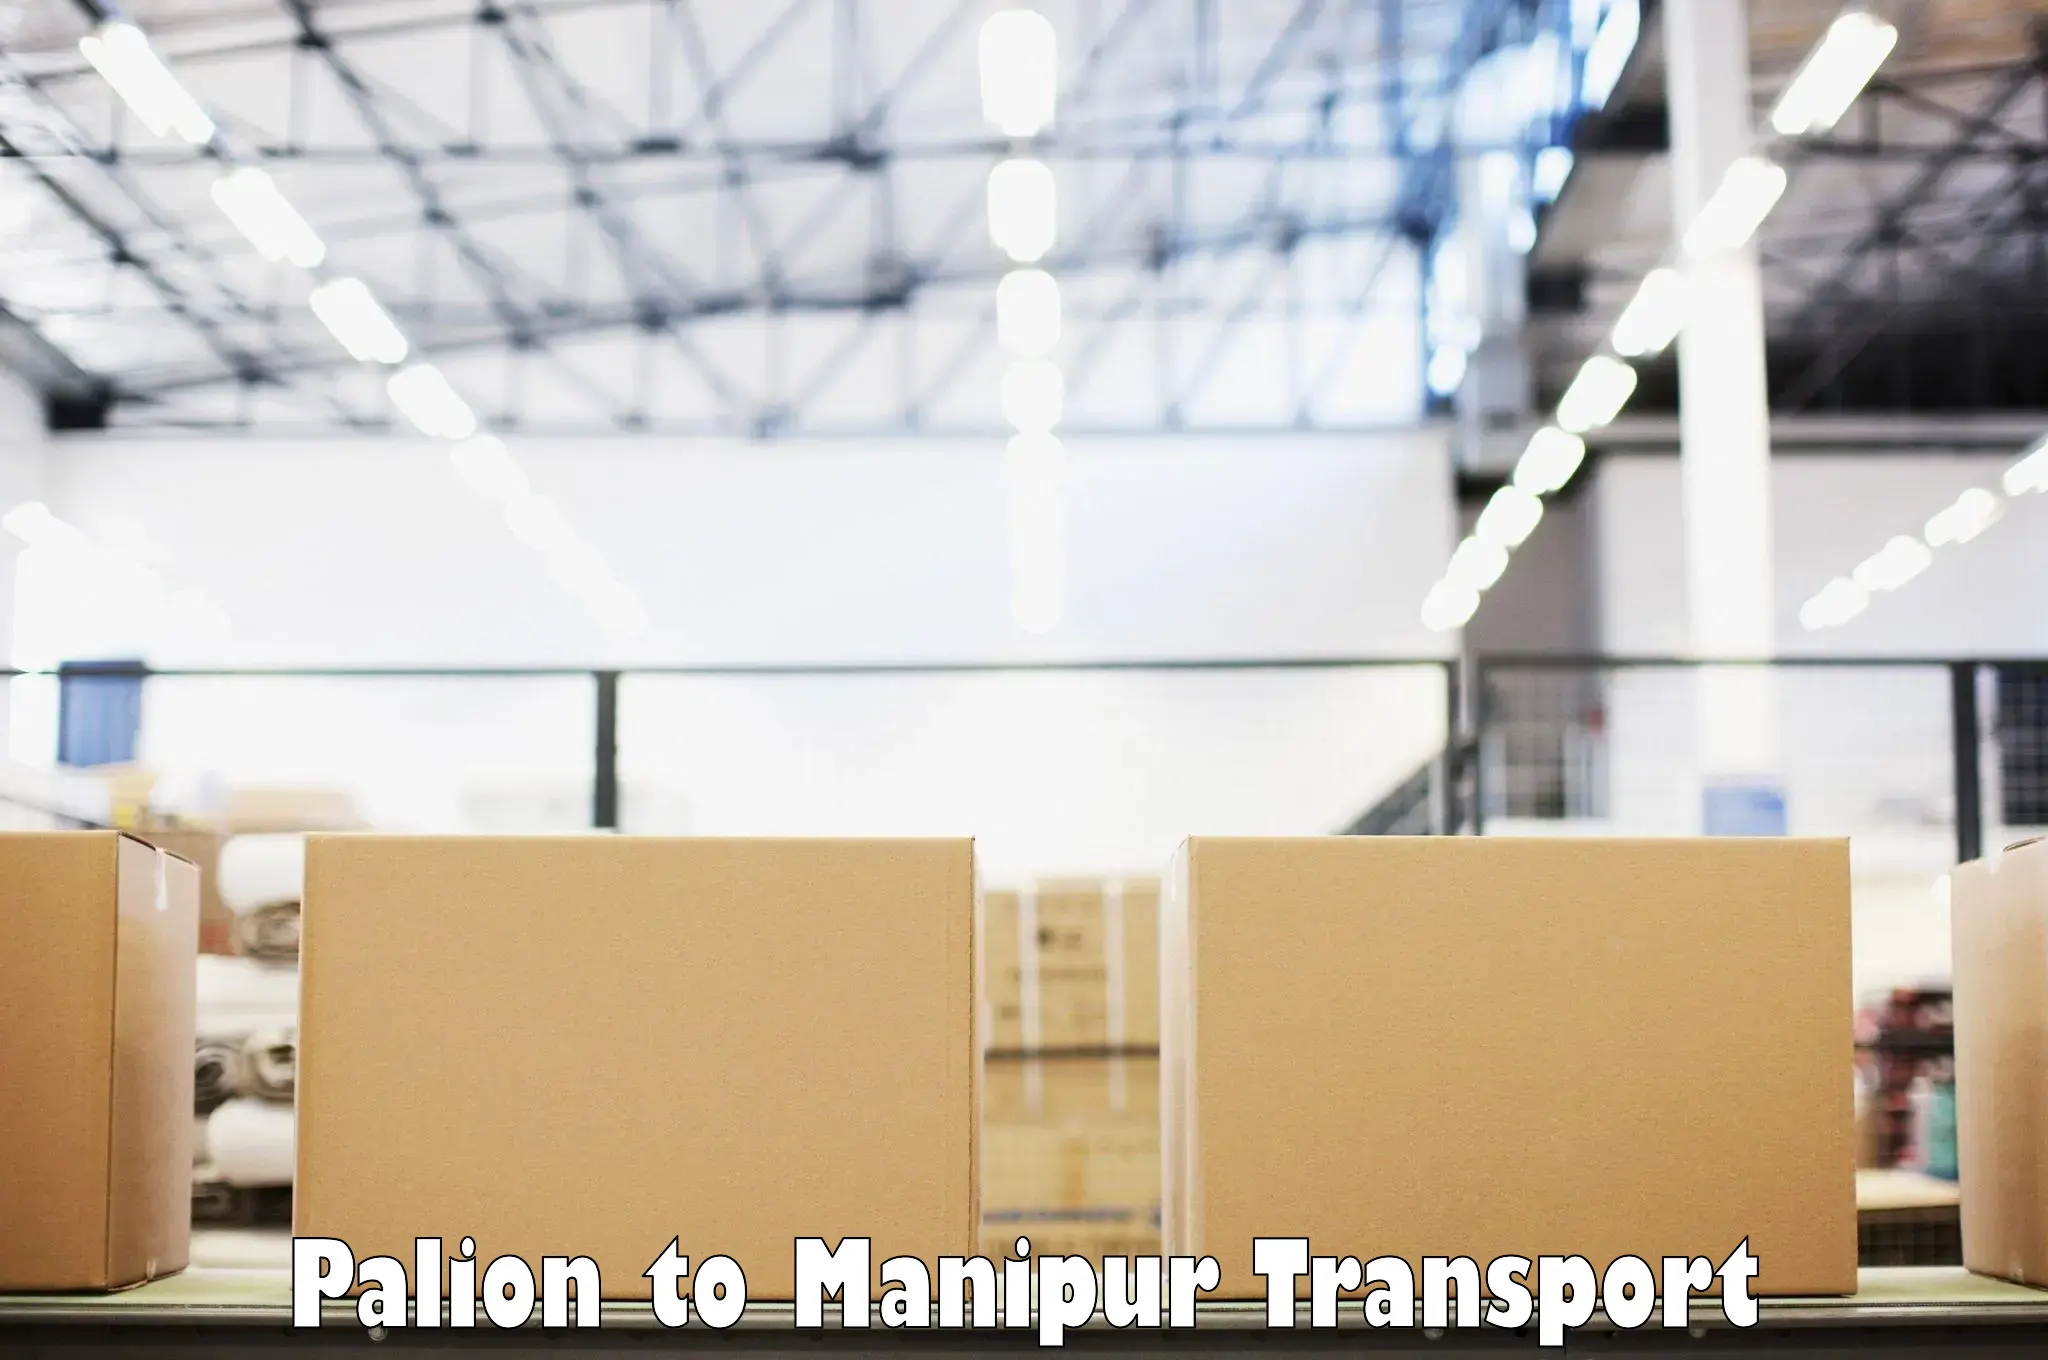 Nearby transport service Palion to Manipur